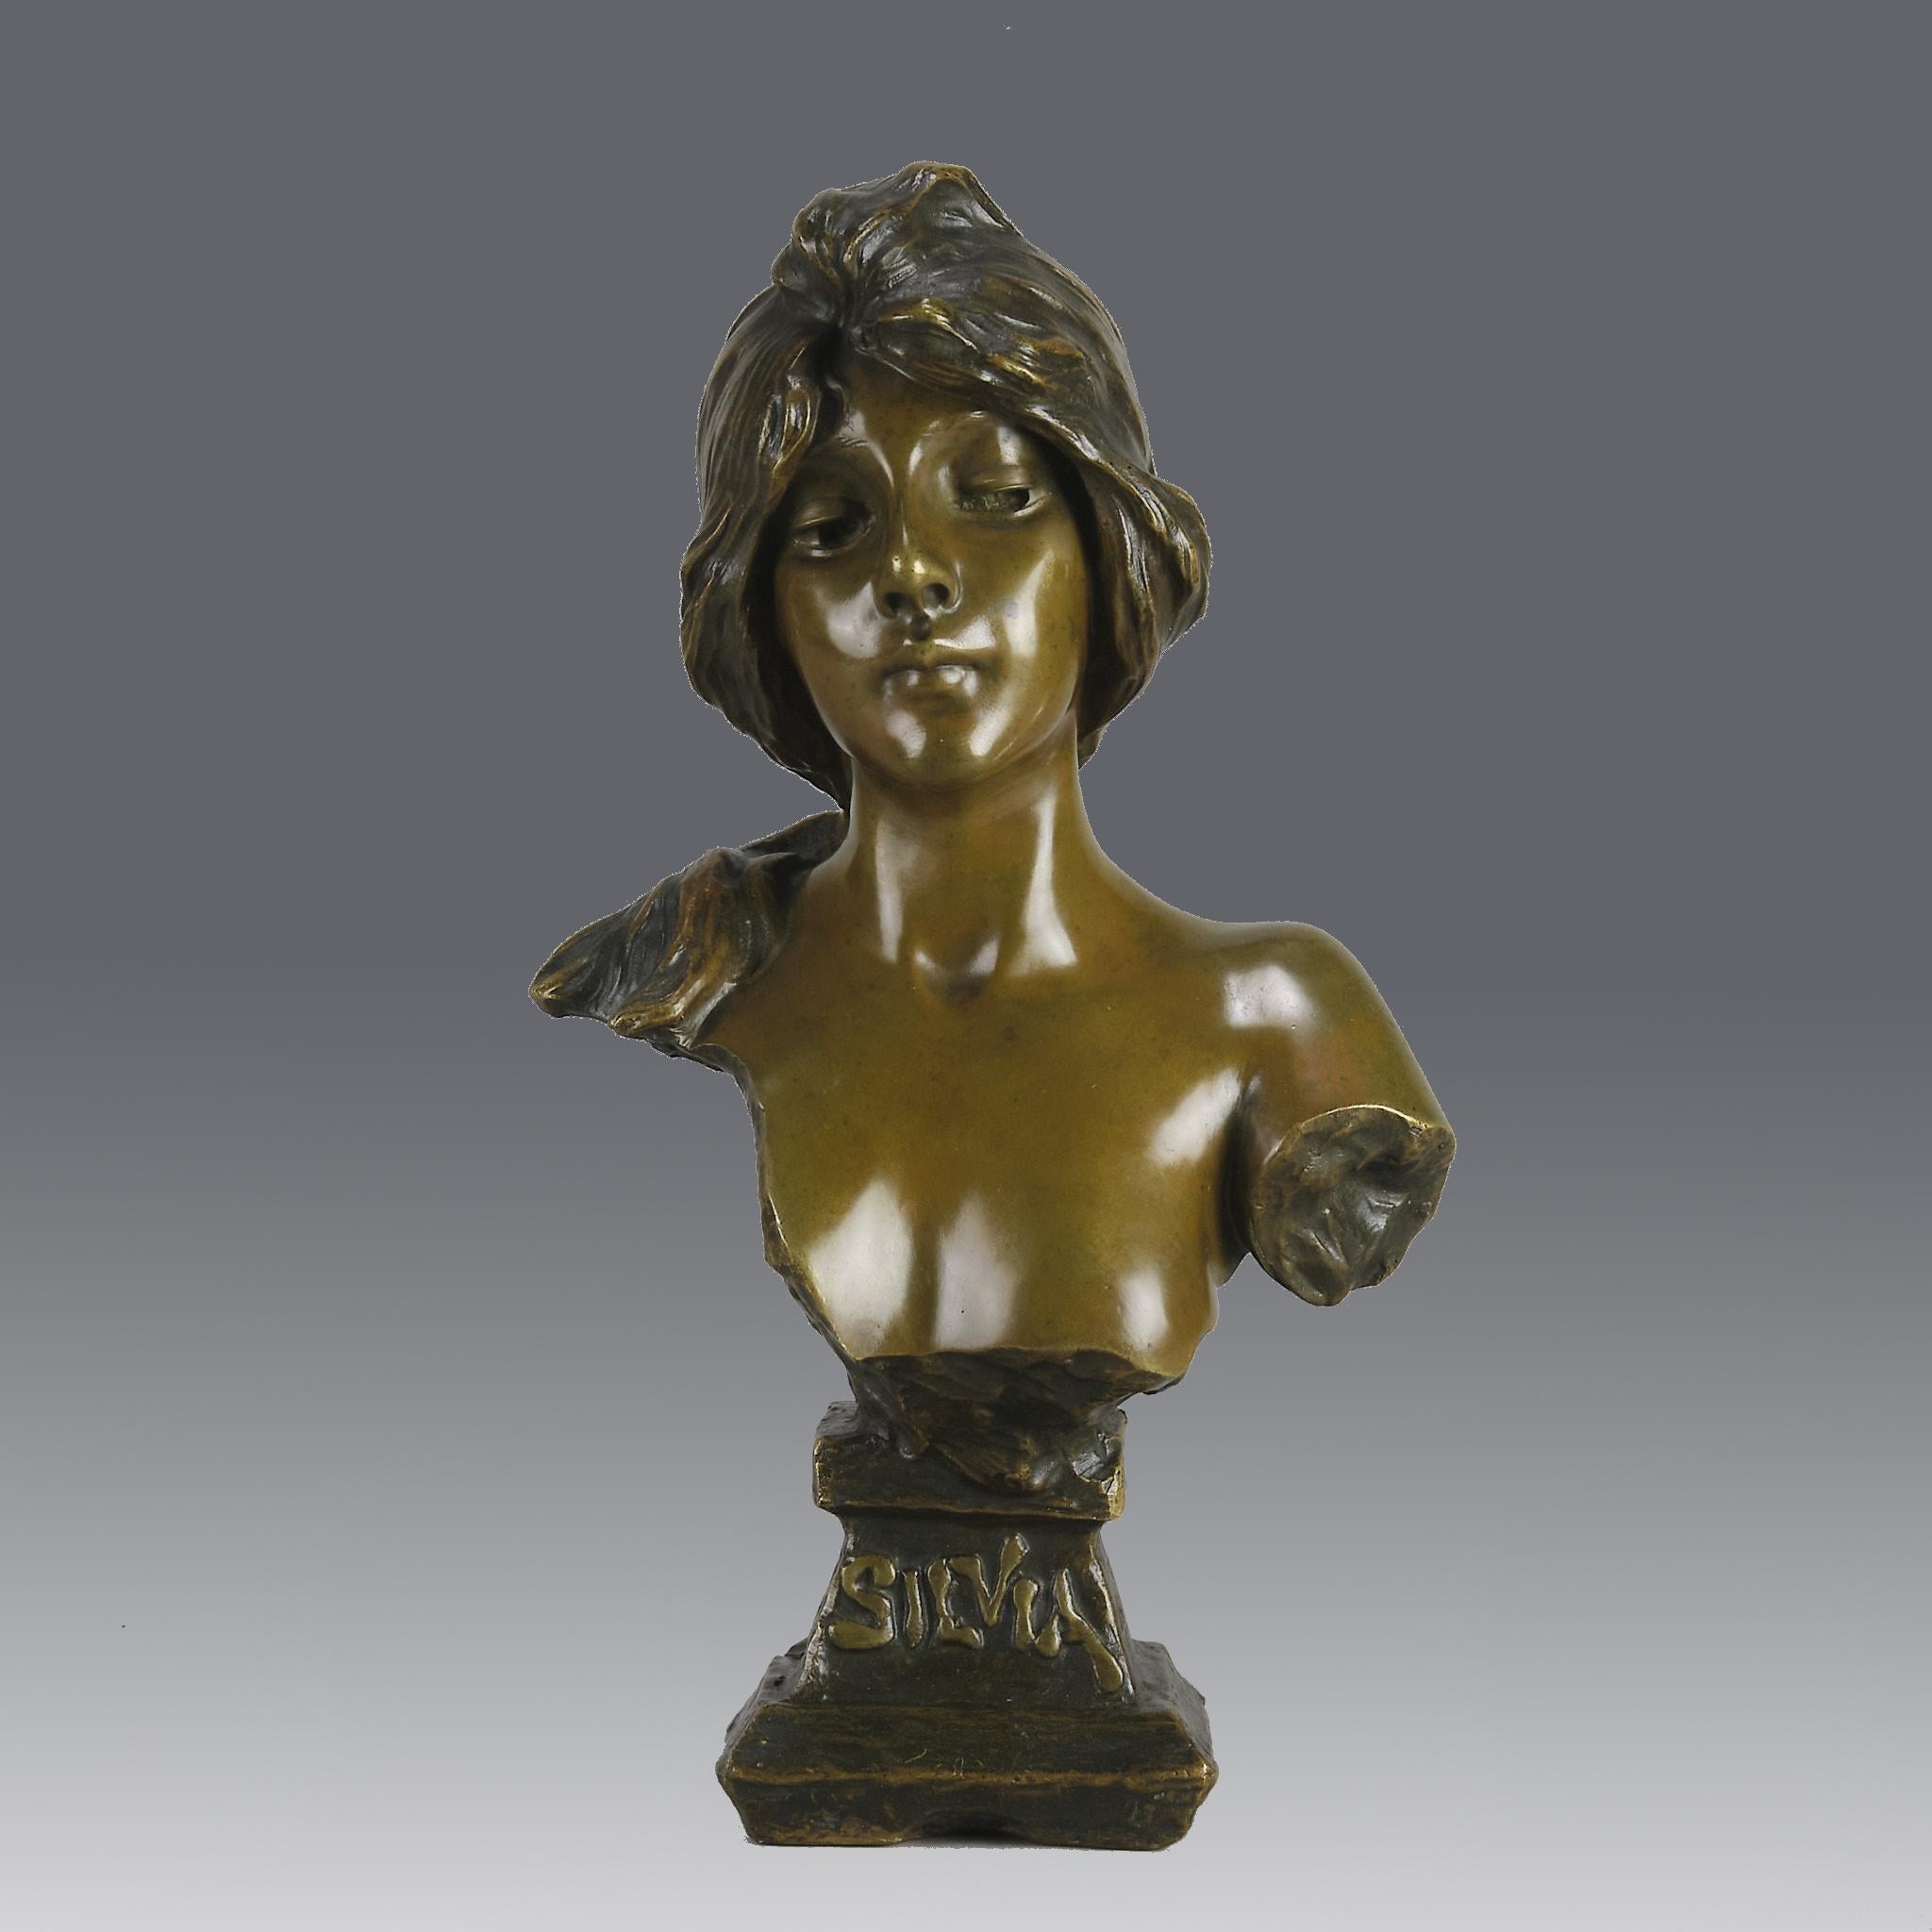 A very fine late 19th century French bronze bust of an attractive classical maiden modelled in the Art Nouveau style, with fabulous multi hued patination of brown and a subtle green, accentuating the excellent hand finished detail. Signed E